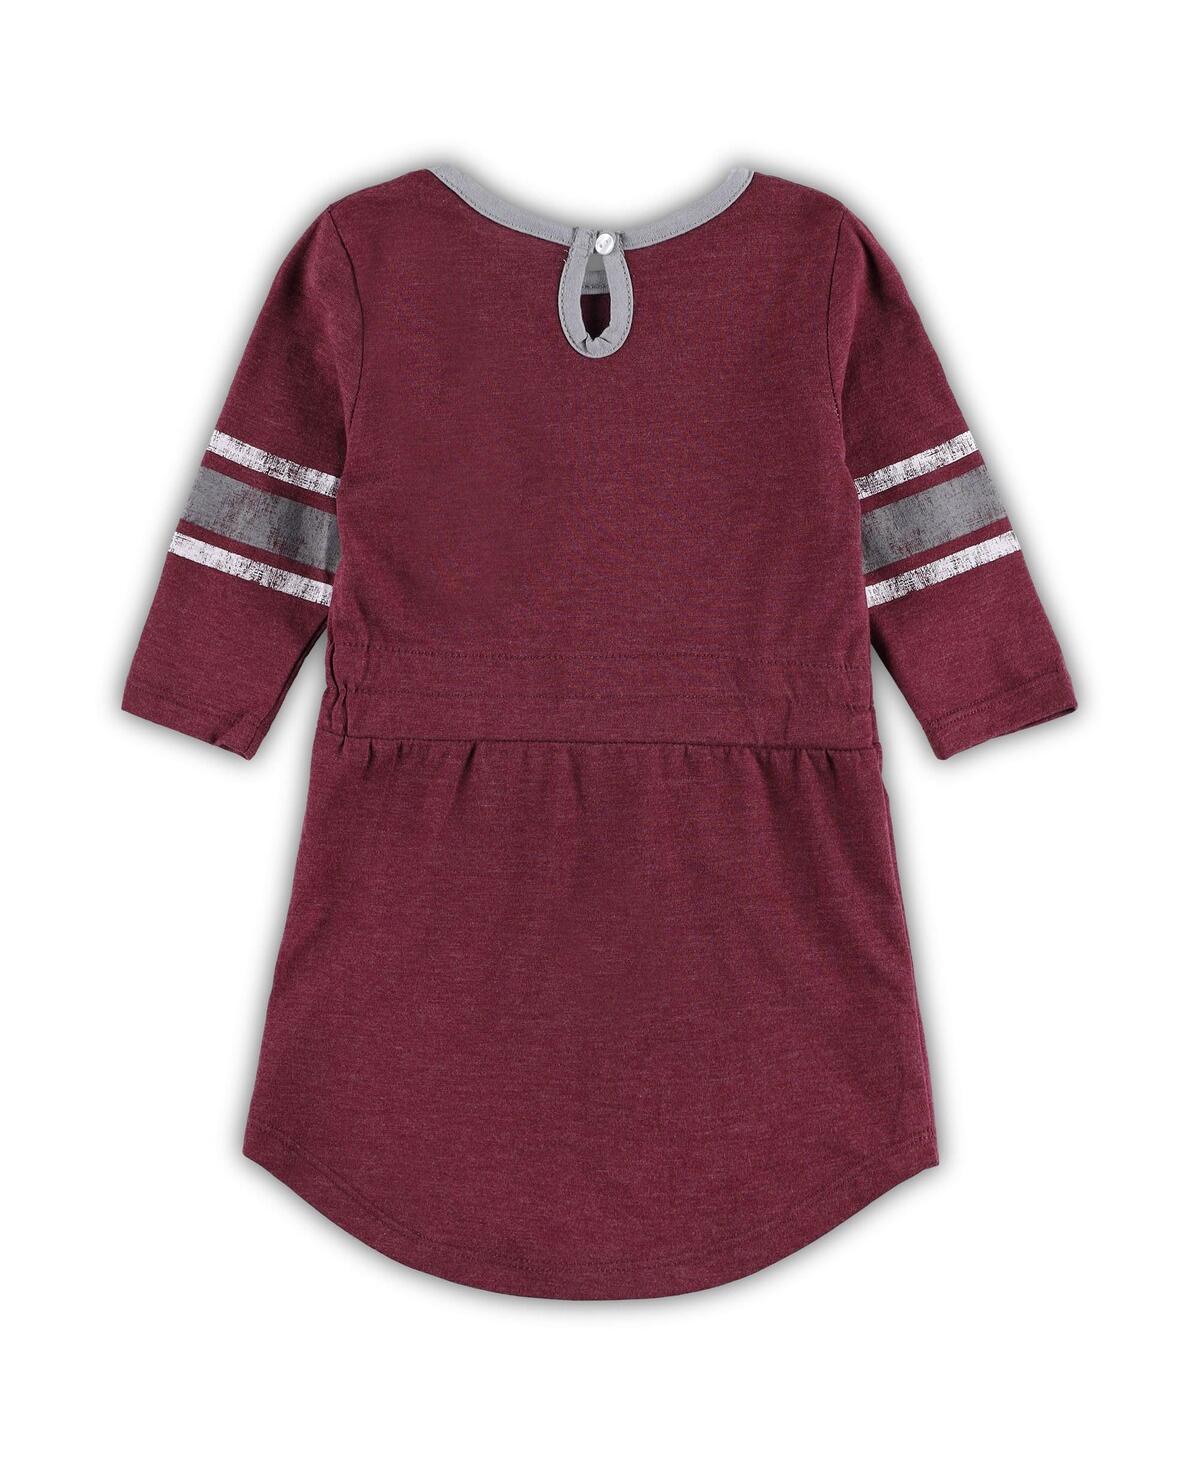 Shop Colosseum Toddler Girls  Heathered Maroon Texas A&m Aggies Poppin Sleeve Stripe Dress